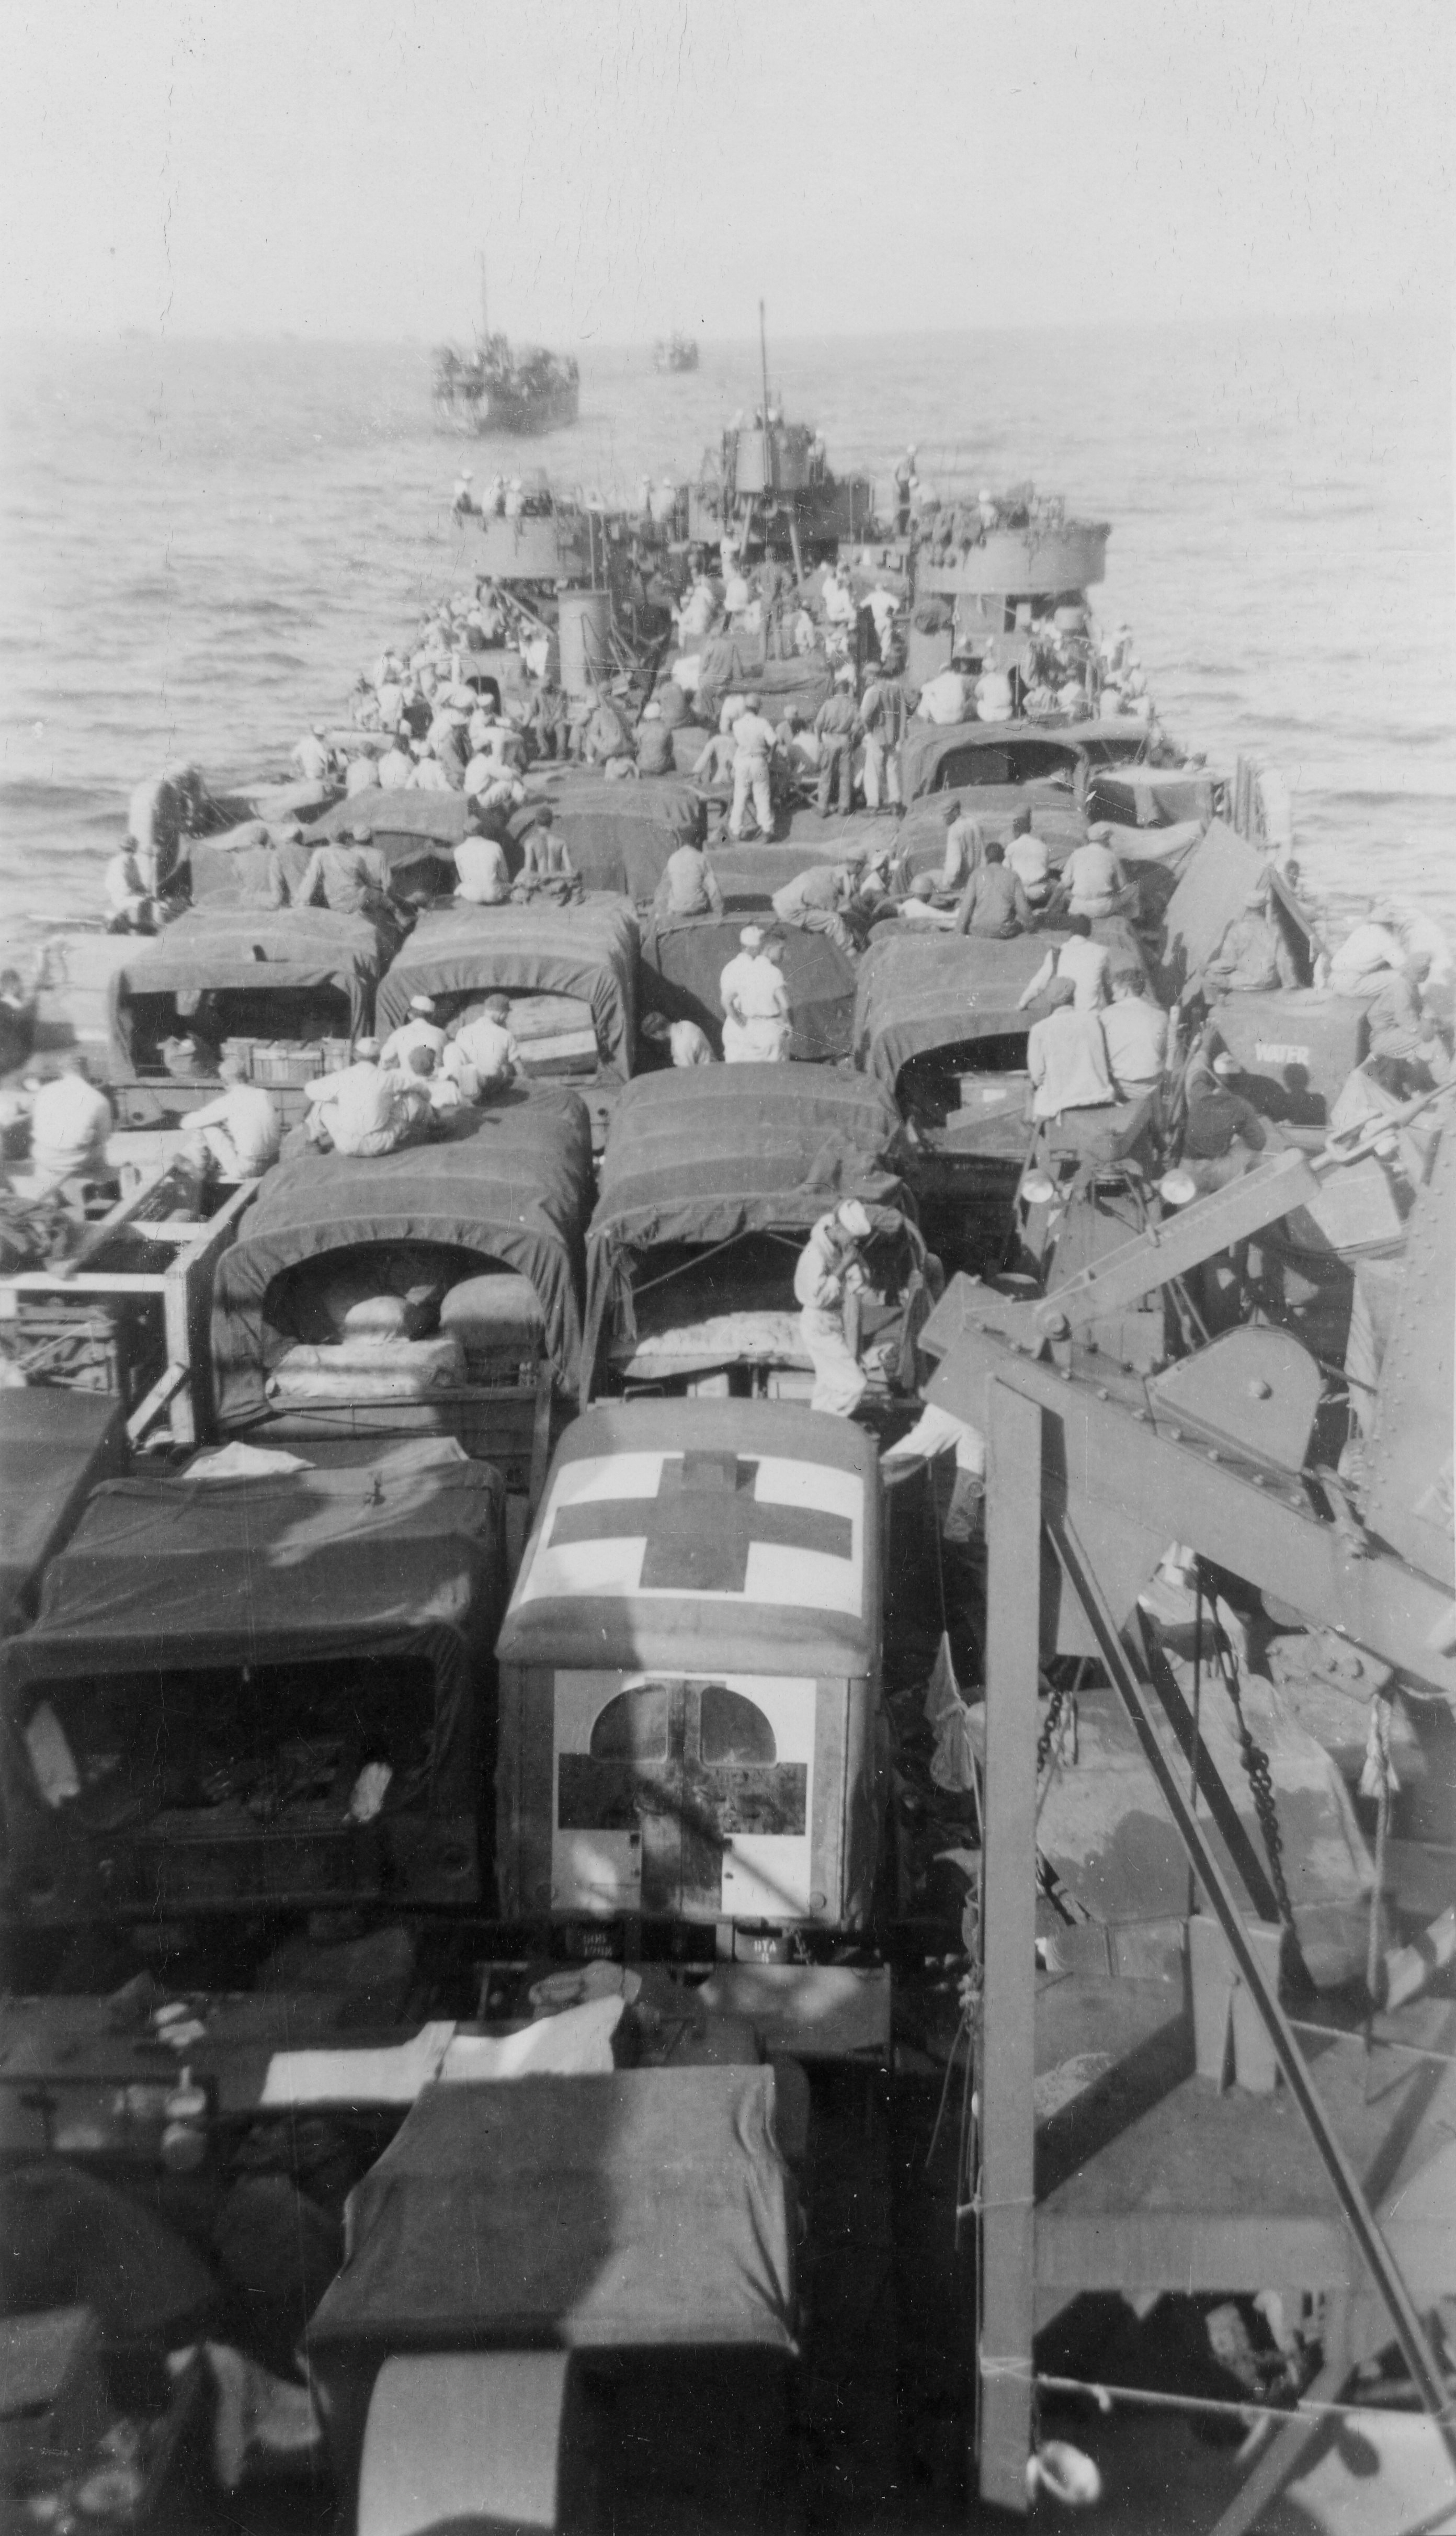 A United States Navy LST ferrying a US Army field hospital unit toward Omaha Beach, Normandie, France, 6 Jun 1944.